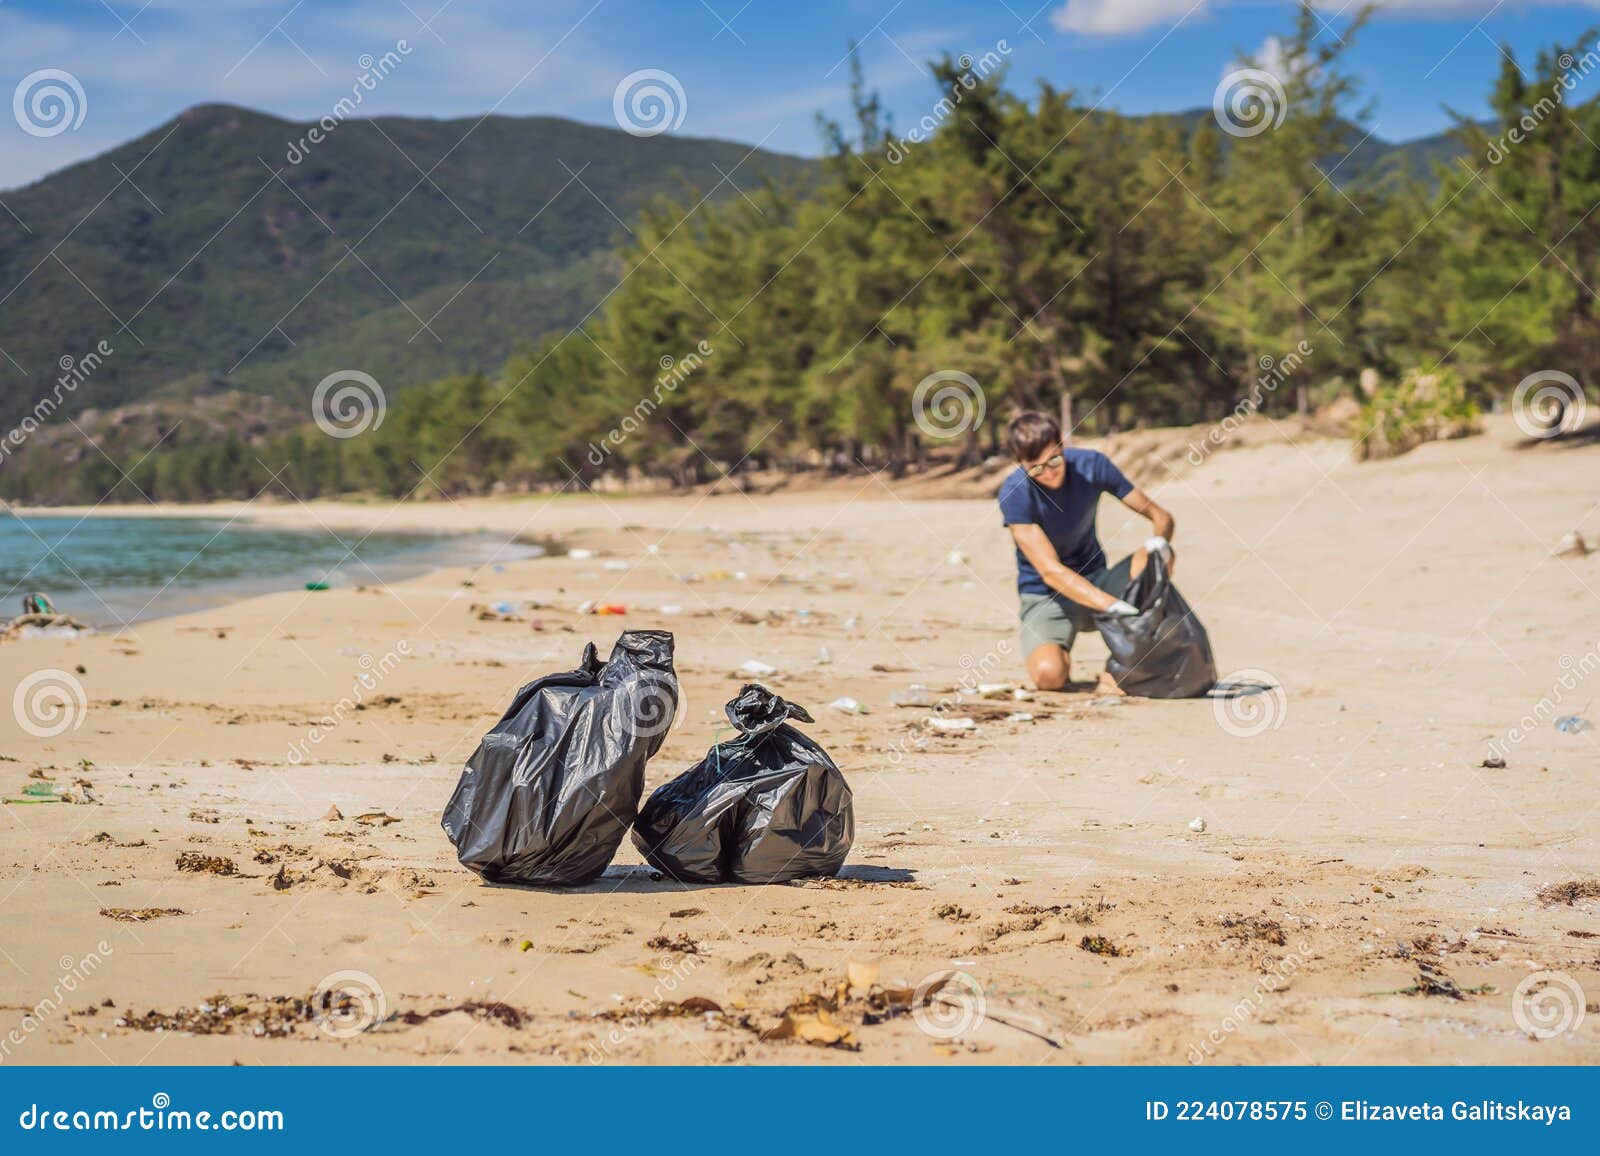 man in gloves pick up plastic bags that pollute sea. problem of spilled rubbish trash garbage on the beach sand caused